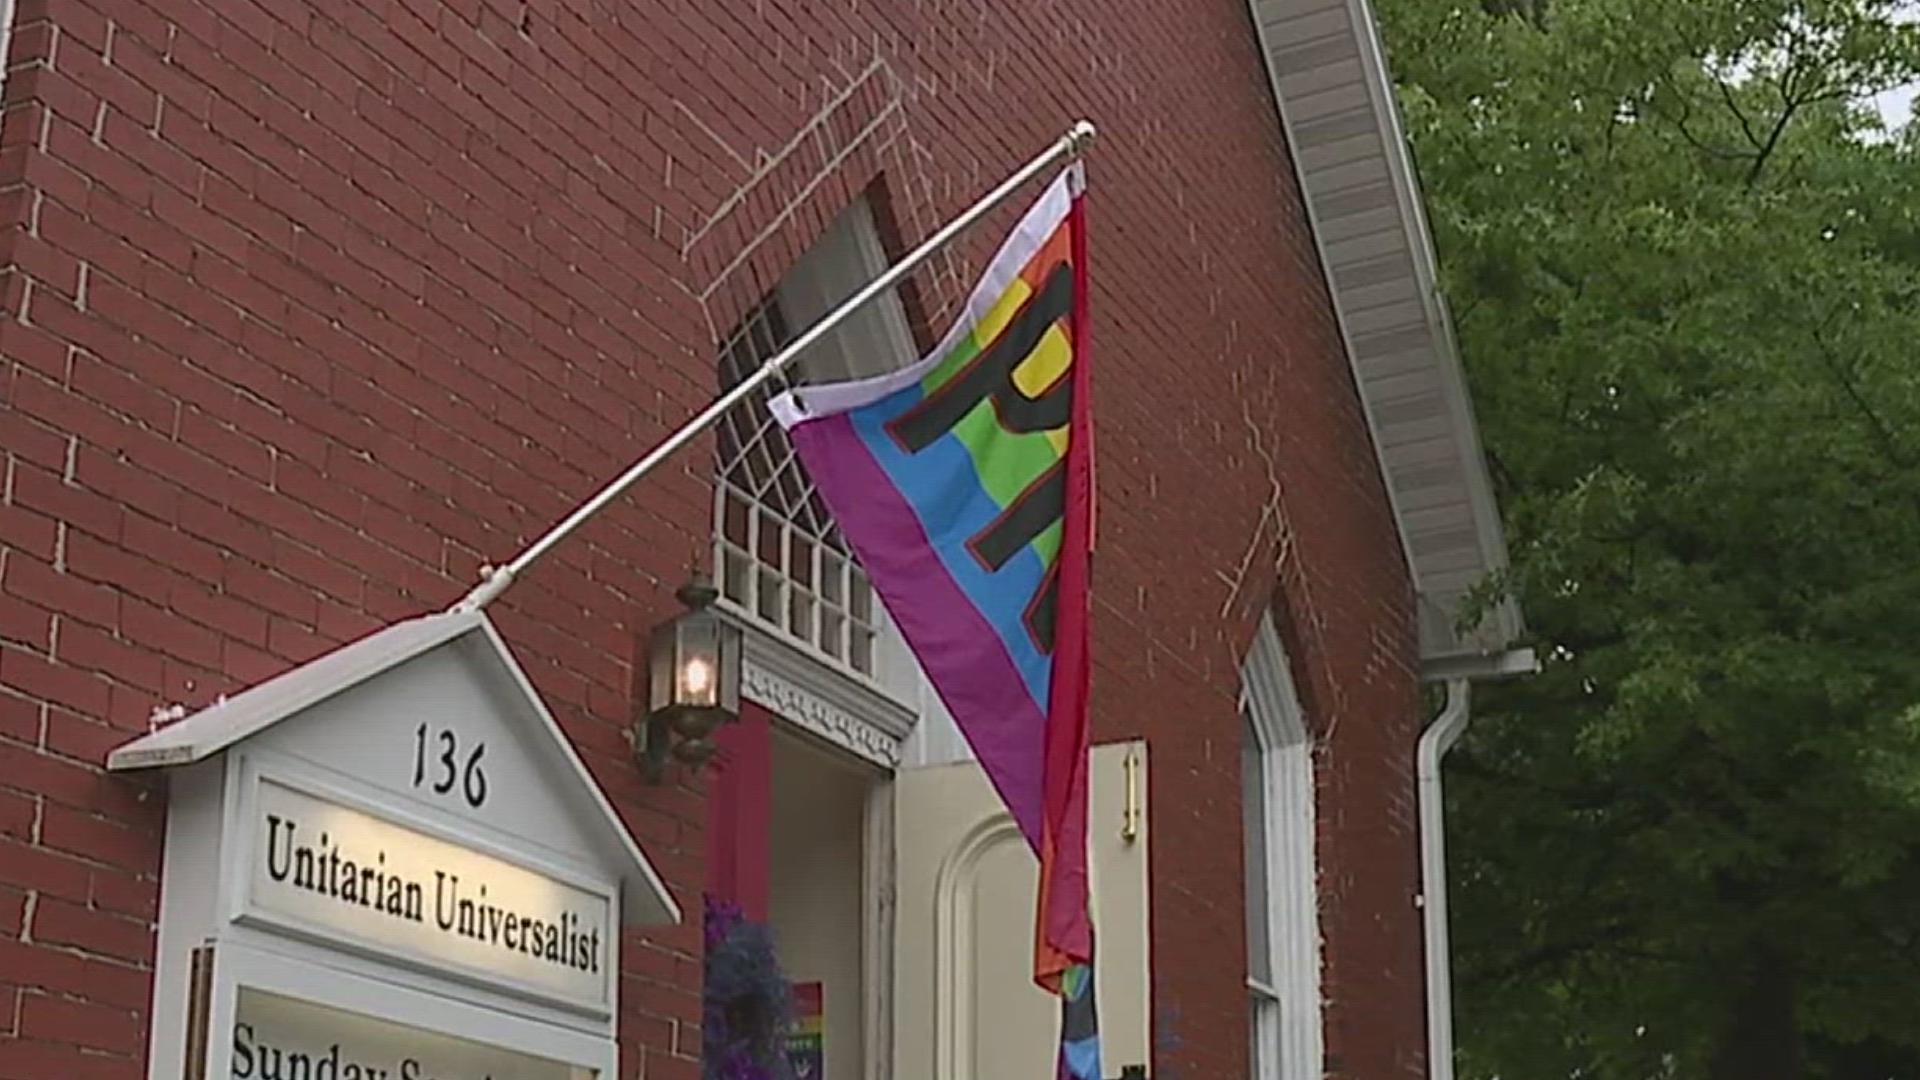 The Gettysburg chapters of St. James Lutheran and Unitarian Universalists say more churches are following their lead in engagement with the LGBTQ+ community.